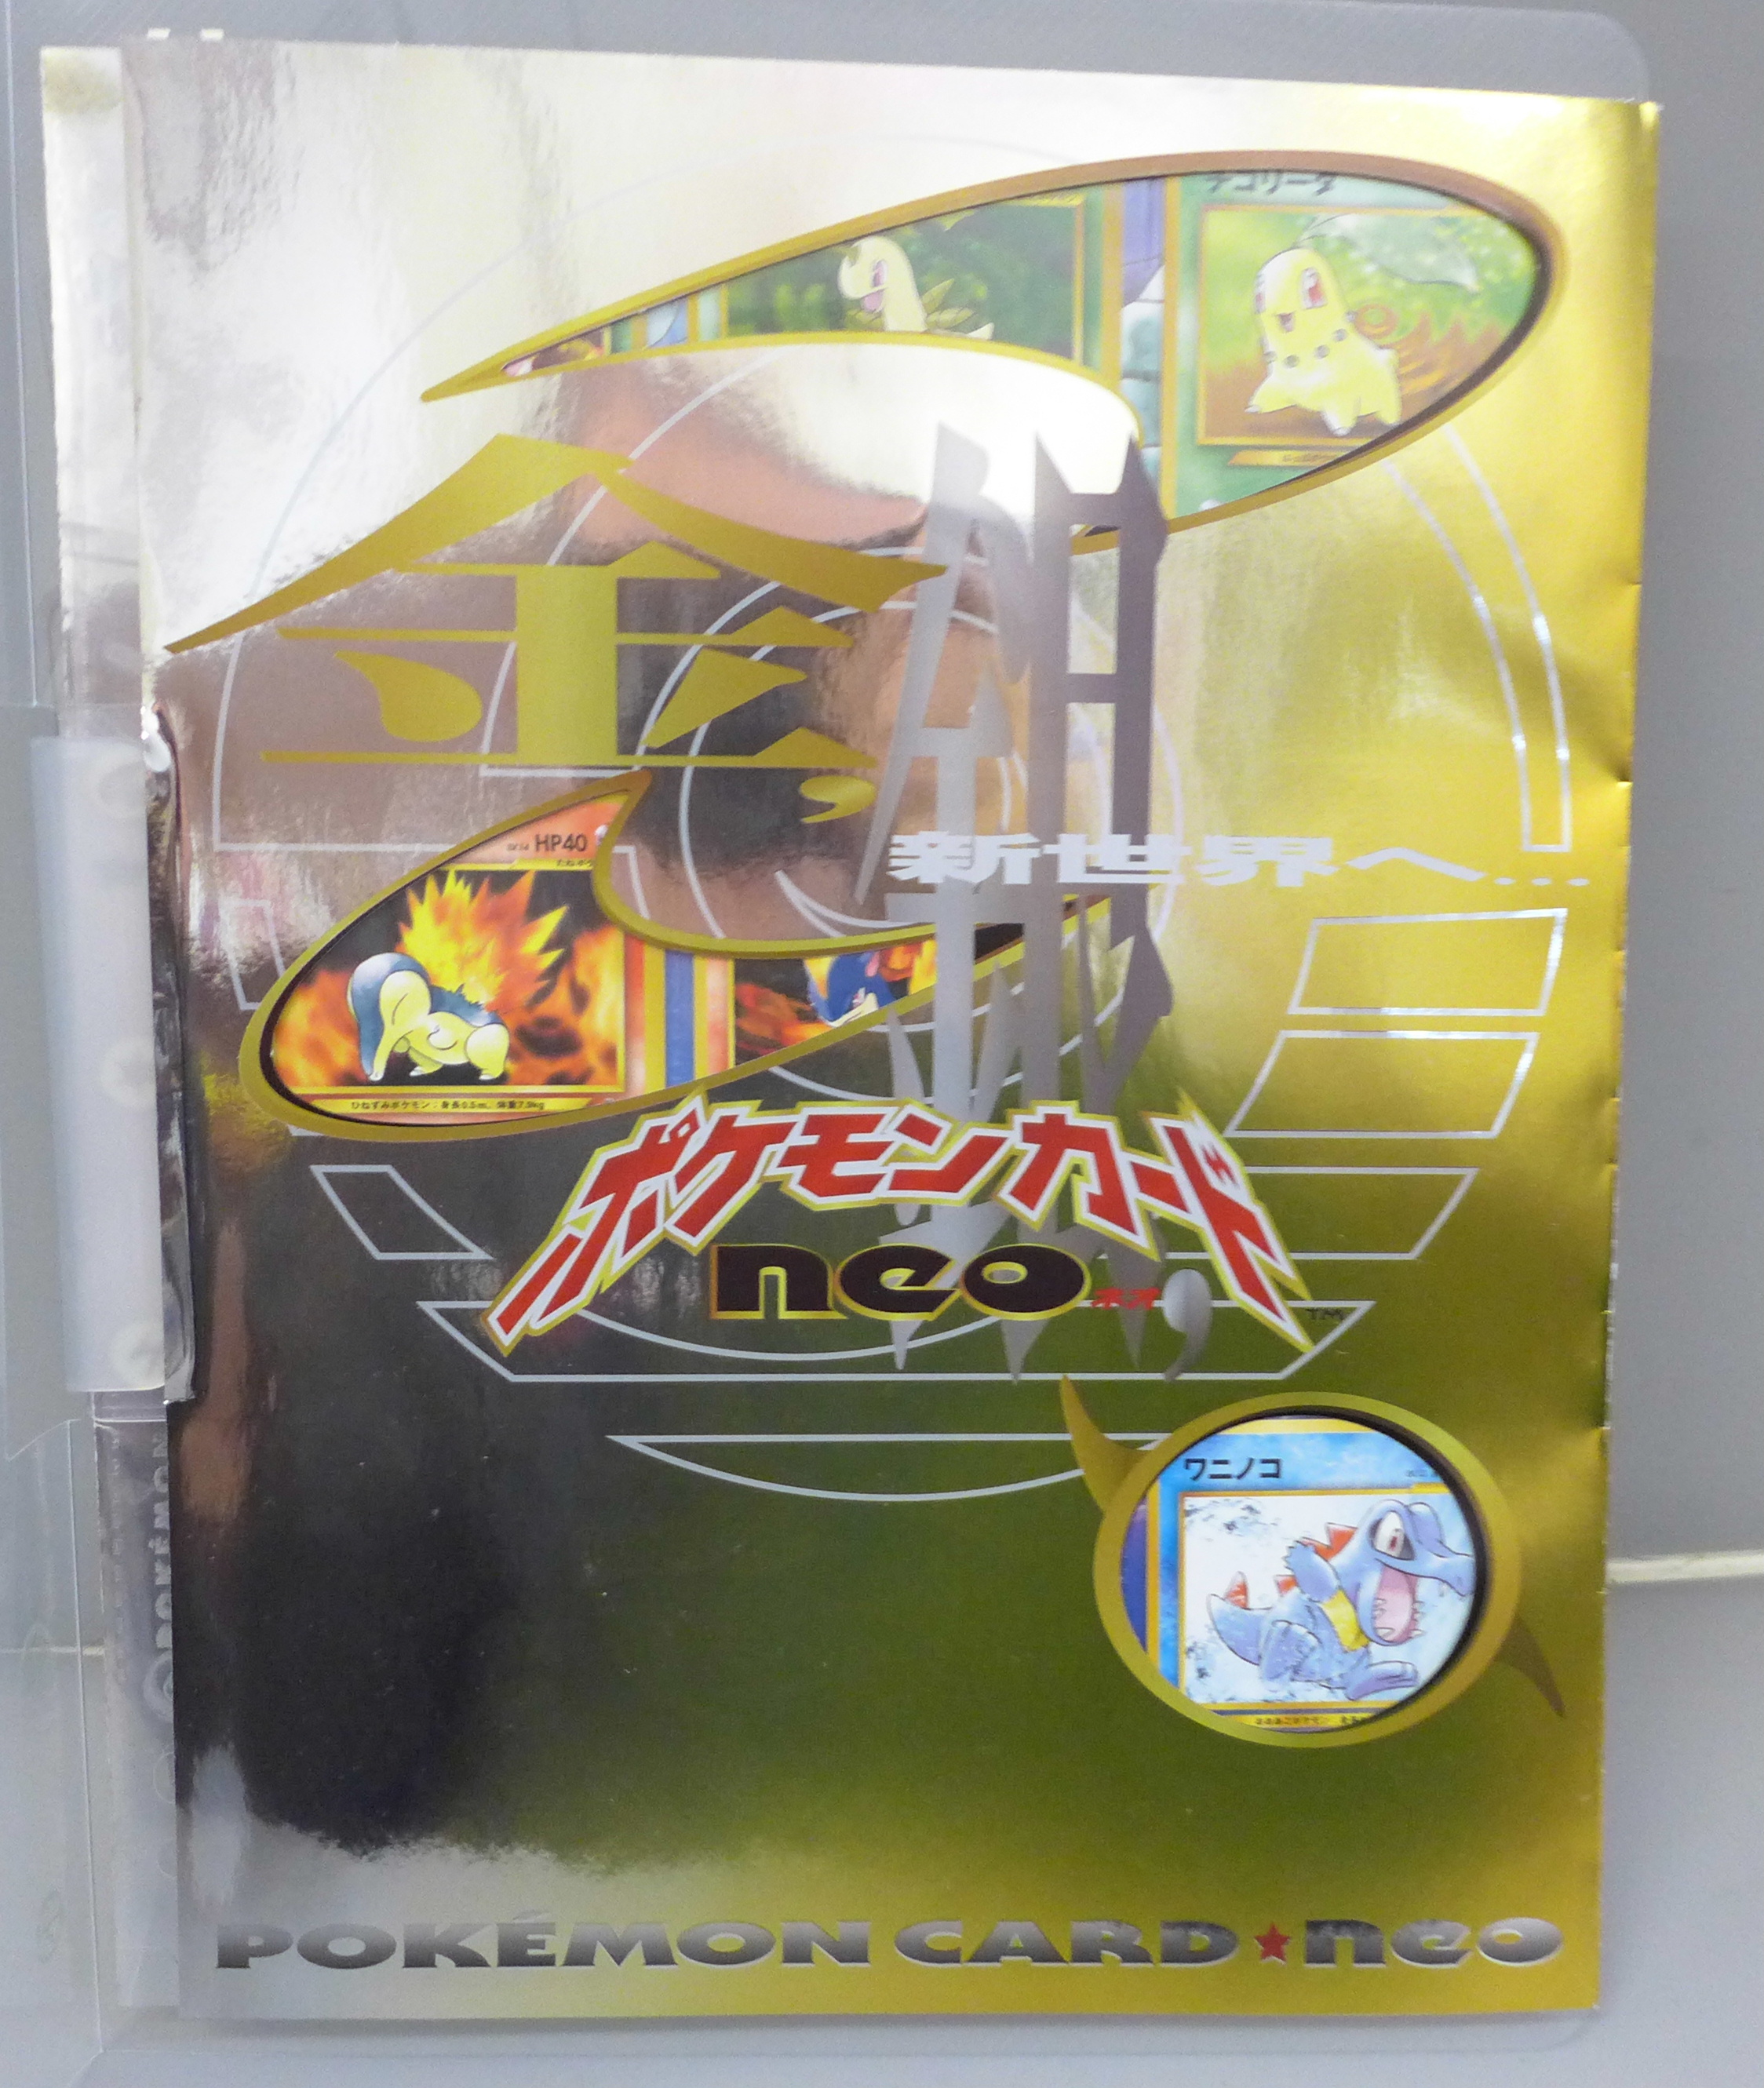 A booklet of Neo Pokemon cards